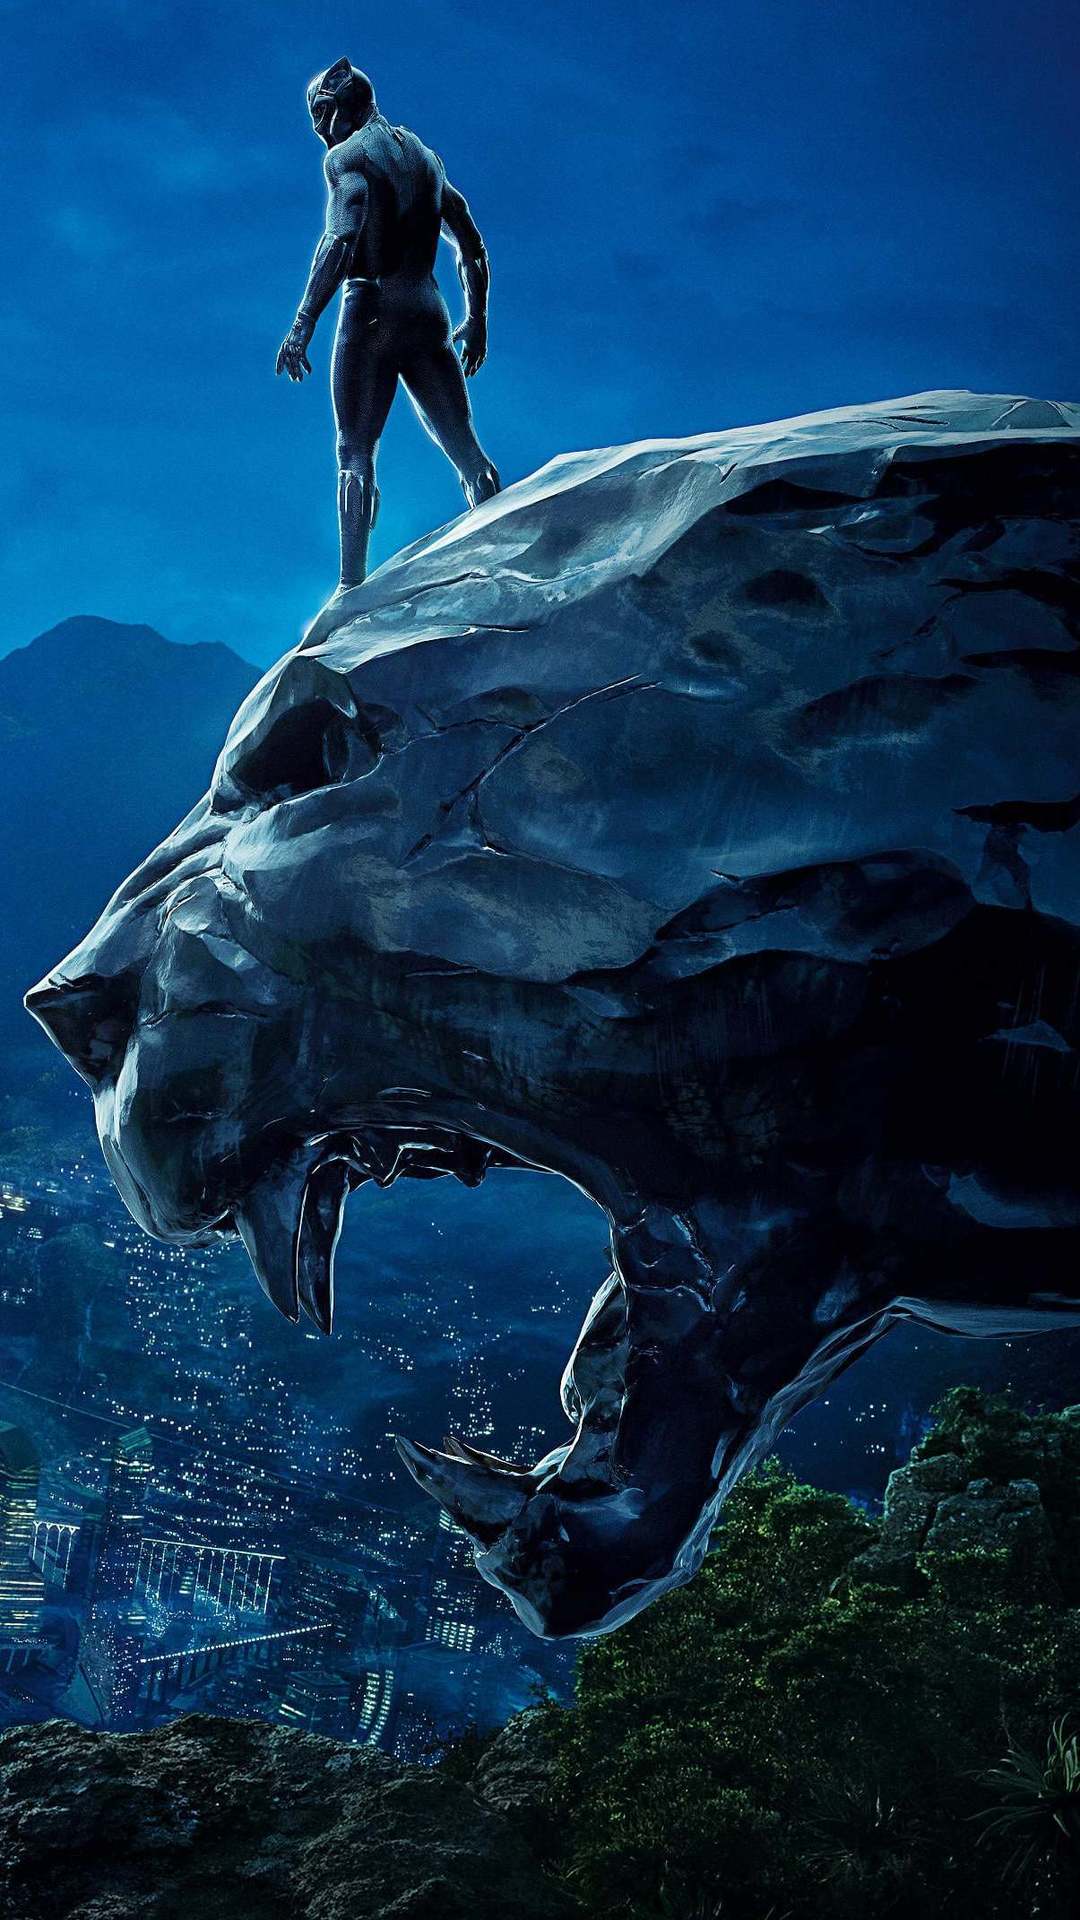 Black Panther Movie HD Wallpaper For IPhone X, 8 8 Plus, 7 7